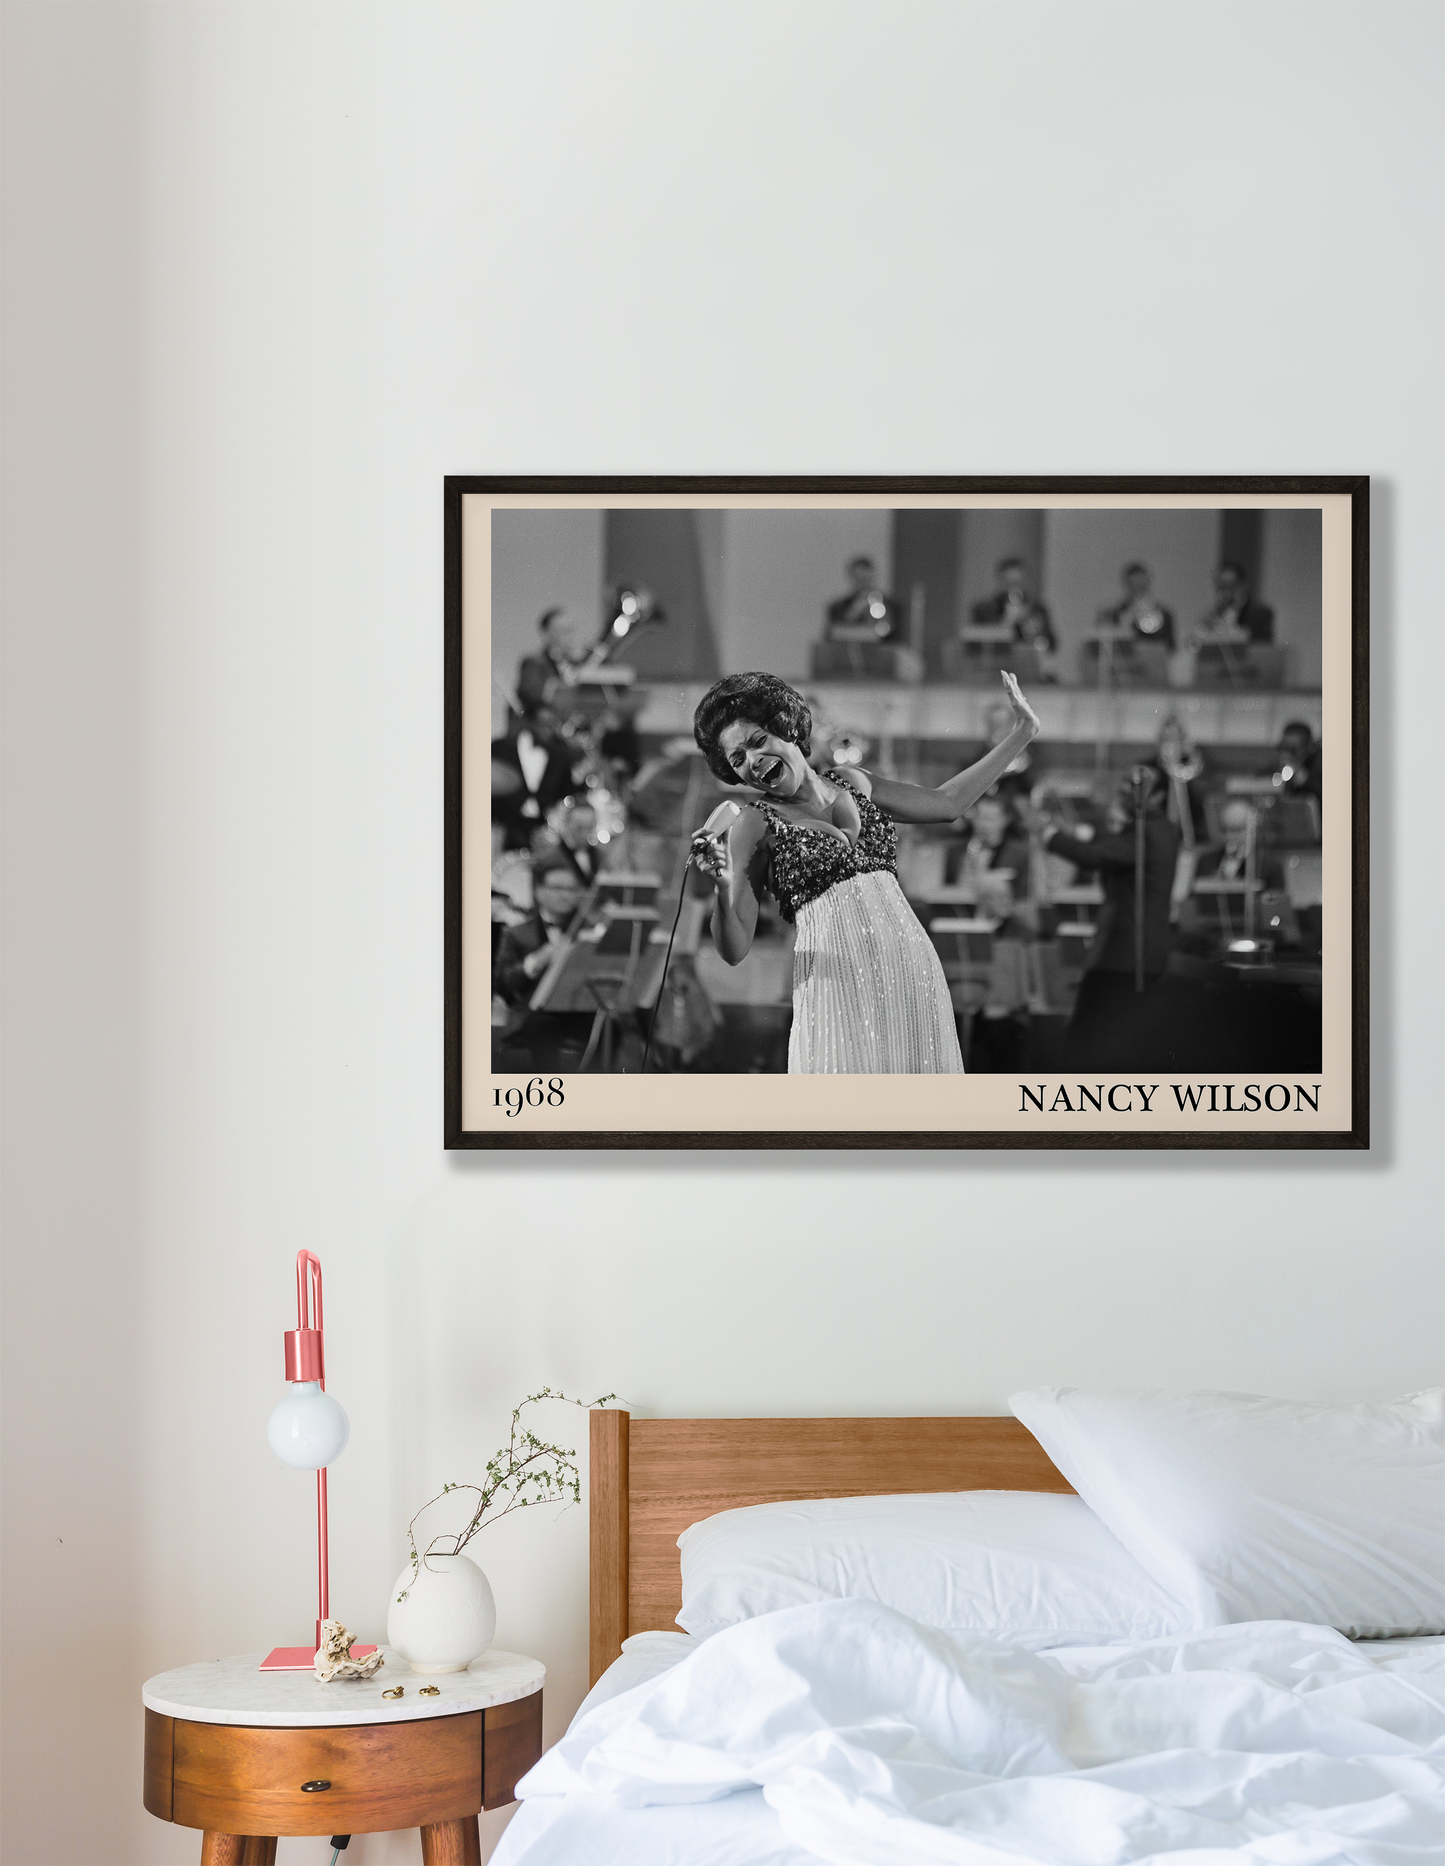 1968 picture of Nancy Wilson singing. Picture crafted into a cool black framed jazz print, with an off-white border. Poster is hanging on a grey bedroom wall